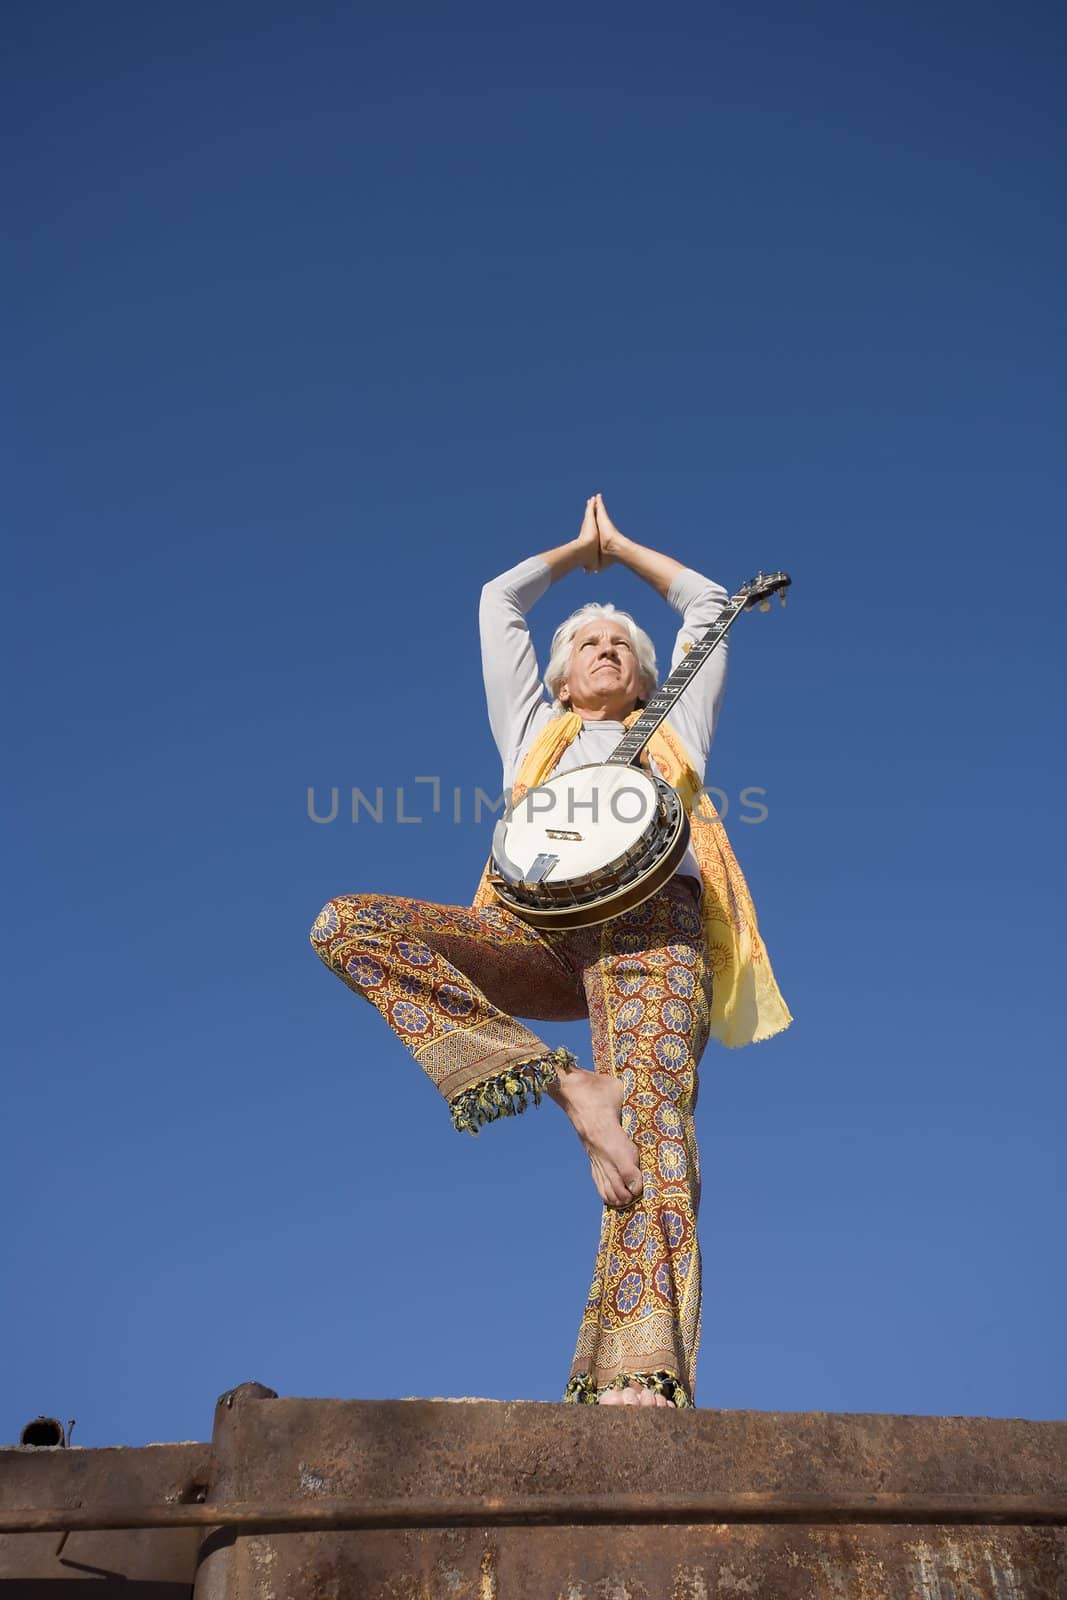 Banjo Player in a Yoga Pose by Creatista